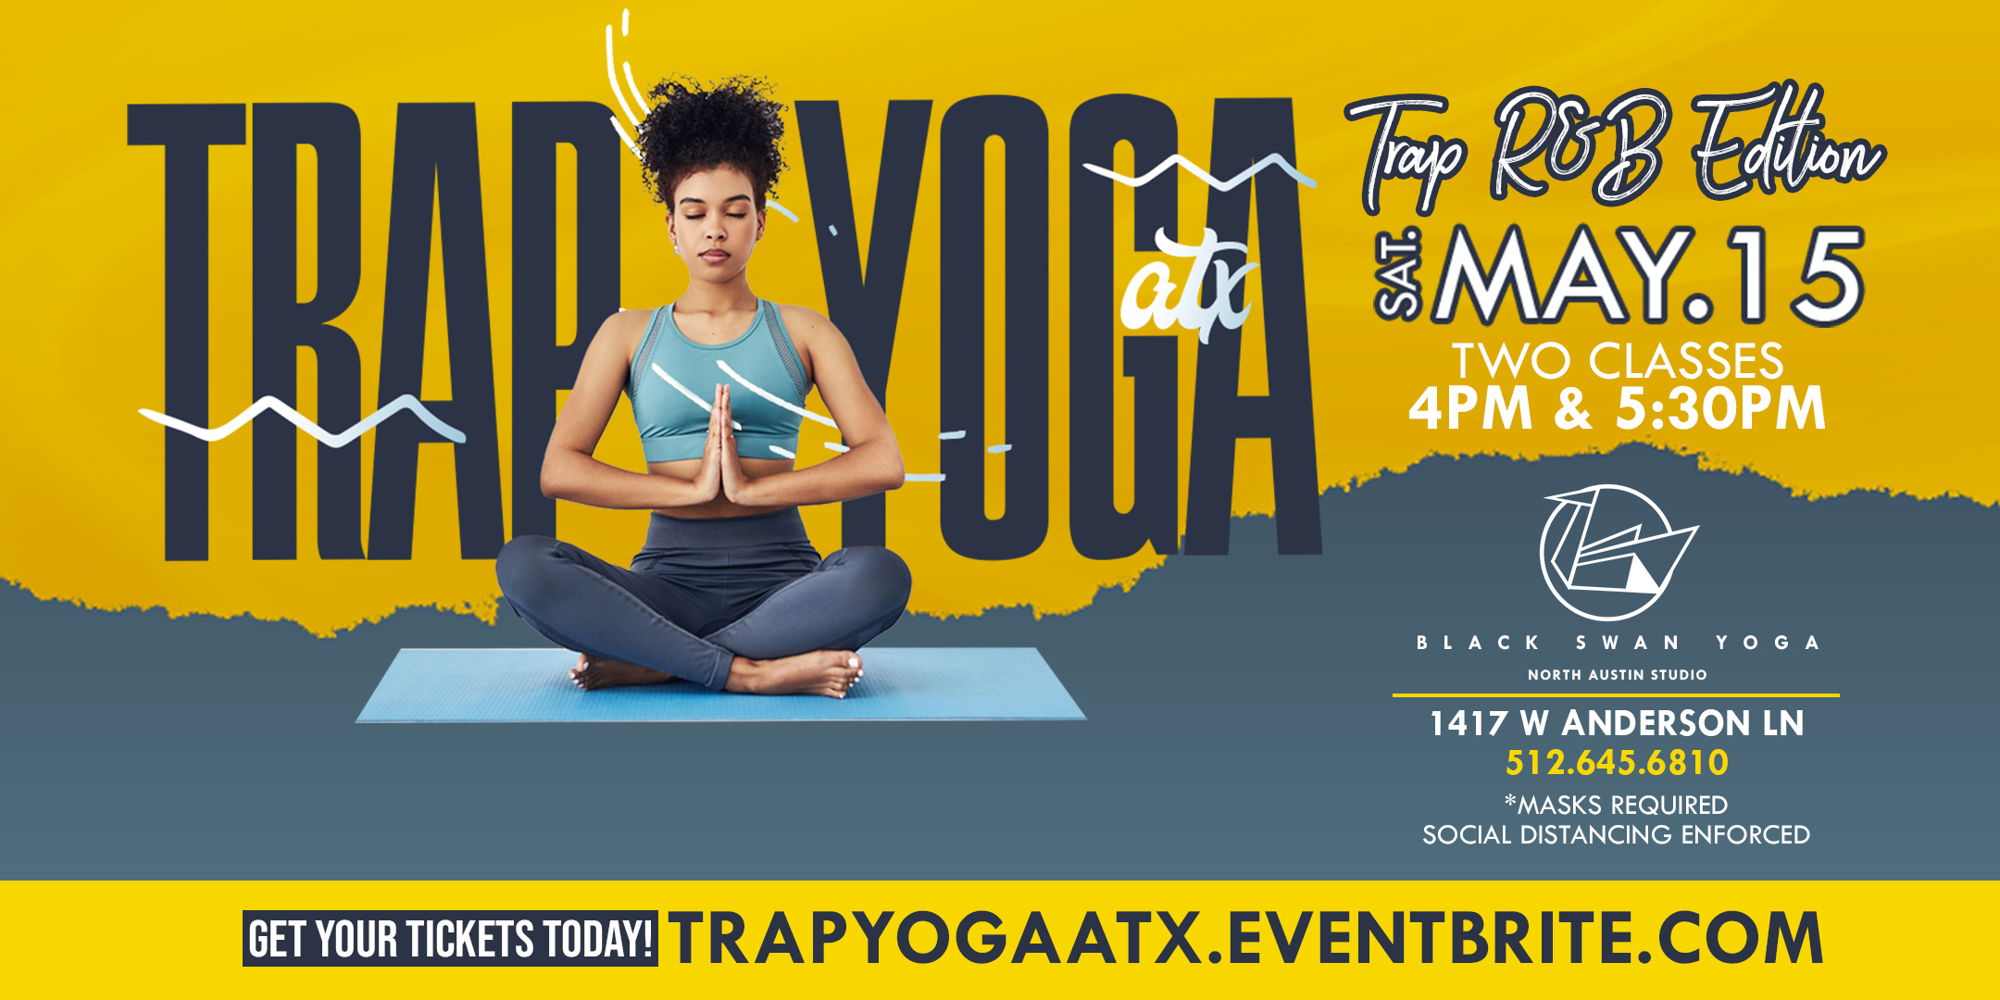 Trap Yoga ATX | Experience Vinyasa Flow Yoga Infused with  Today's Best R&B Music! promotional image